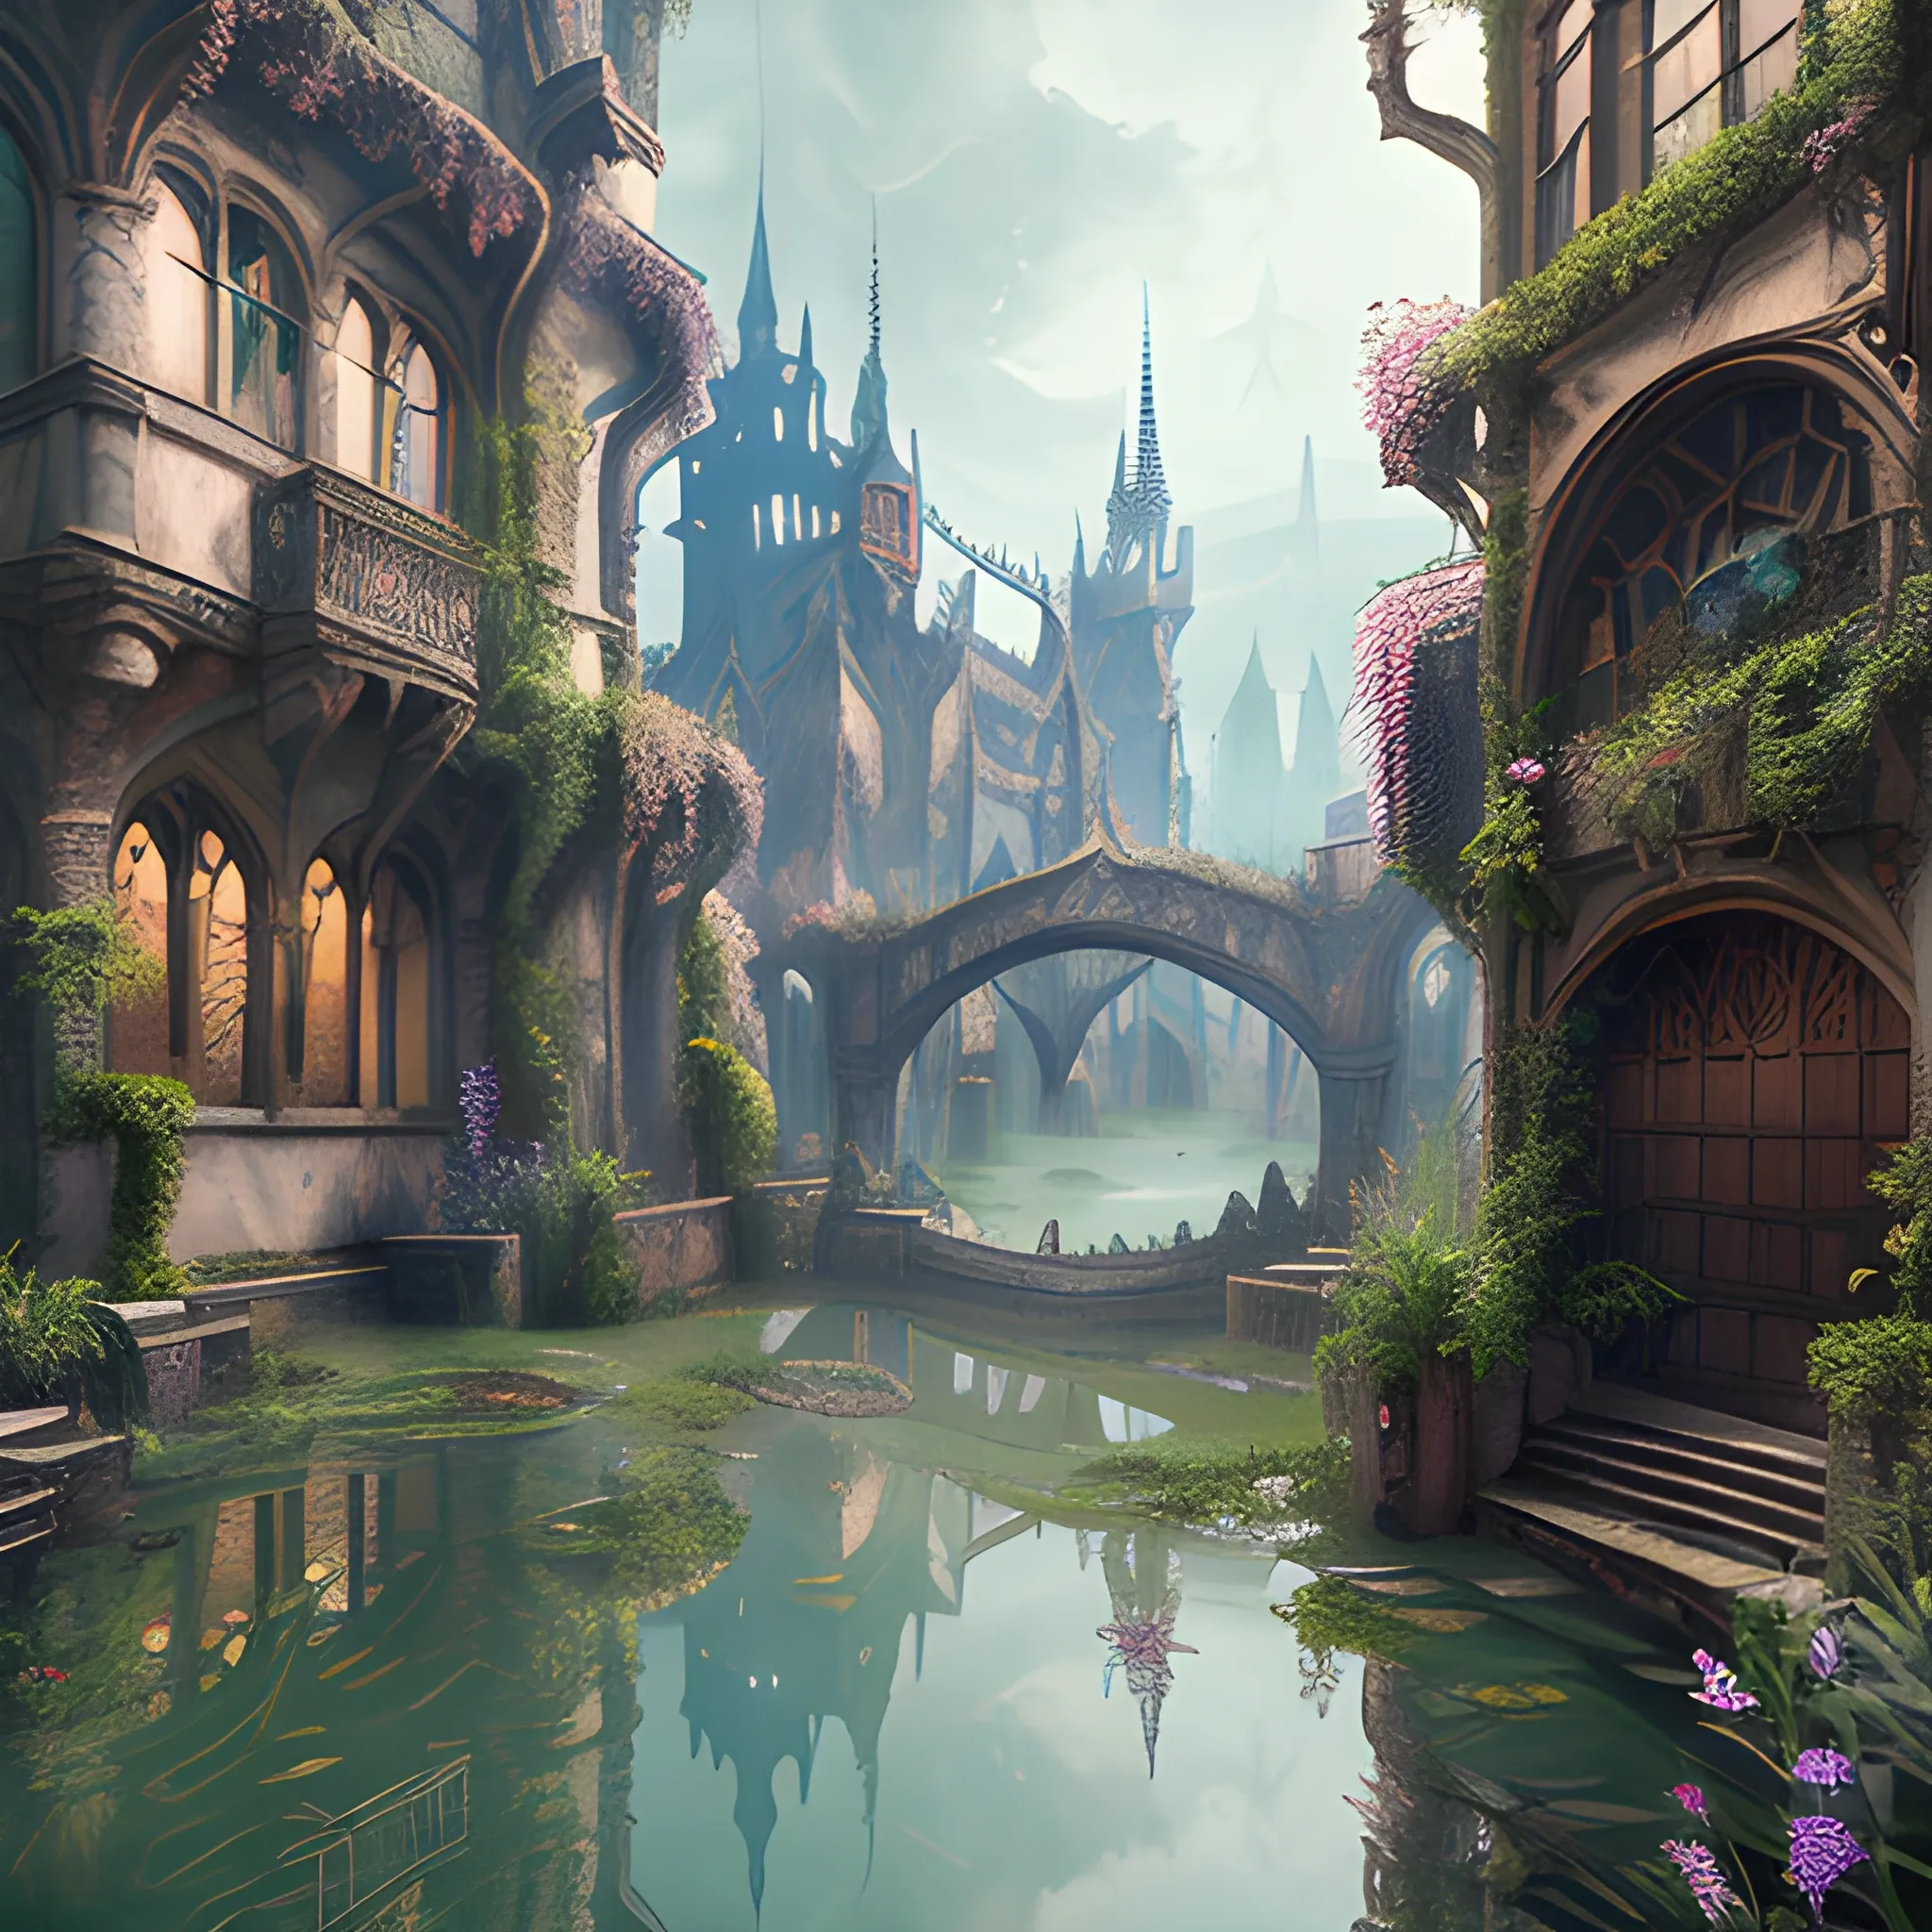 masterpiece, perspective, curious old secret flooded medieval city, cascading armor shops and potion shops, art nouveau, animation art, dark fantasy, overgrown with lush vegetation, cinematic, smooth, detailed, hyperrealism, very small aperture, clear reflection, post production, post-processing, 8k, retouch, HDR, Super-Resolution, Soft Lighting, Ray Tracing Global Illumination, Lumen Reflections, pastel color palette, art deco, Bloodborne feeling